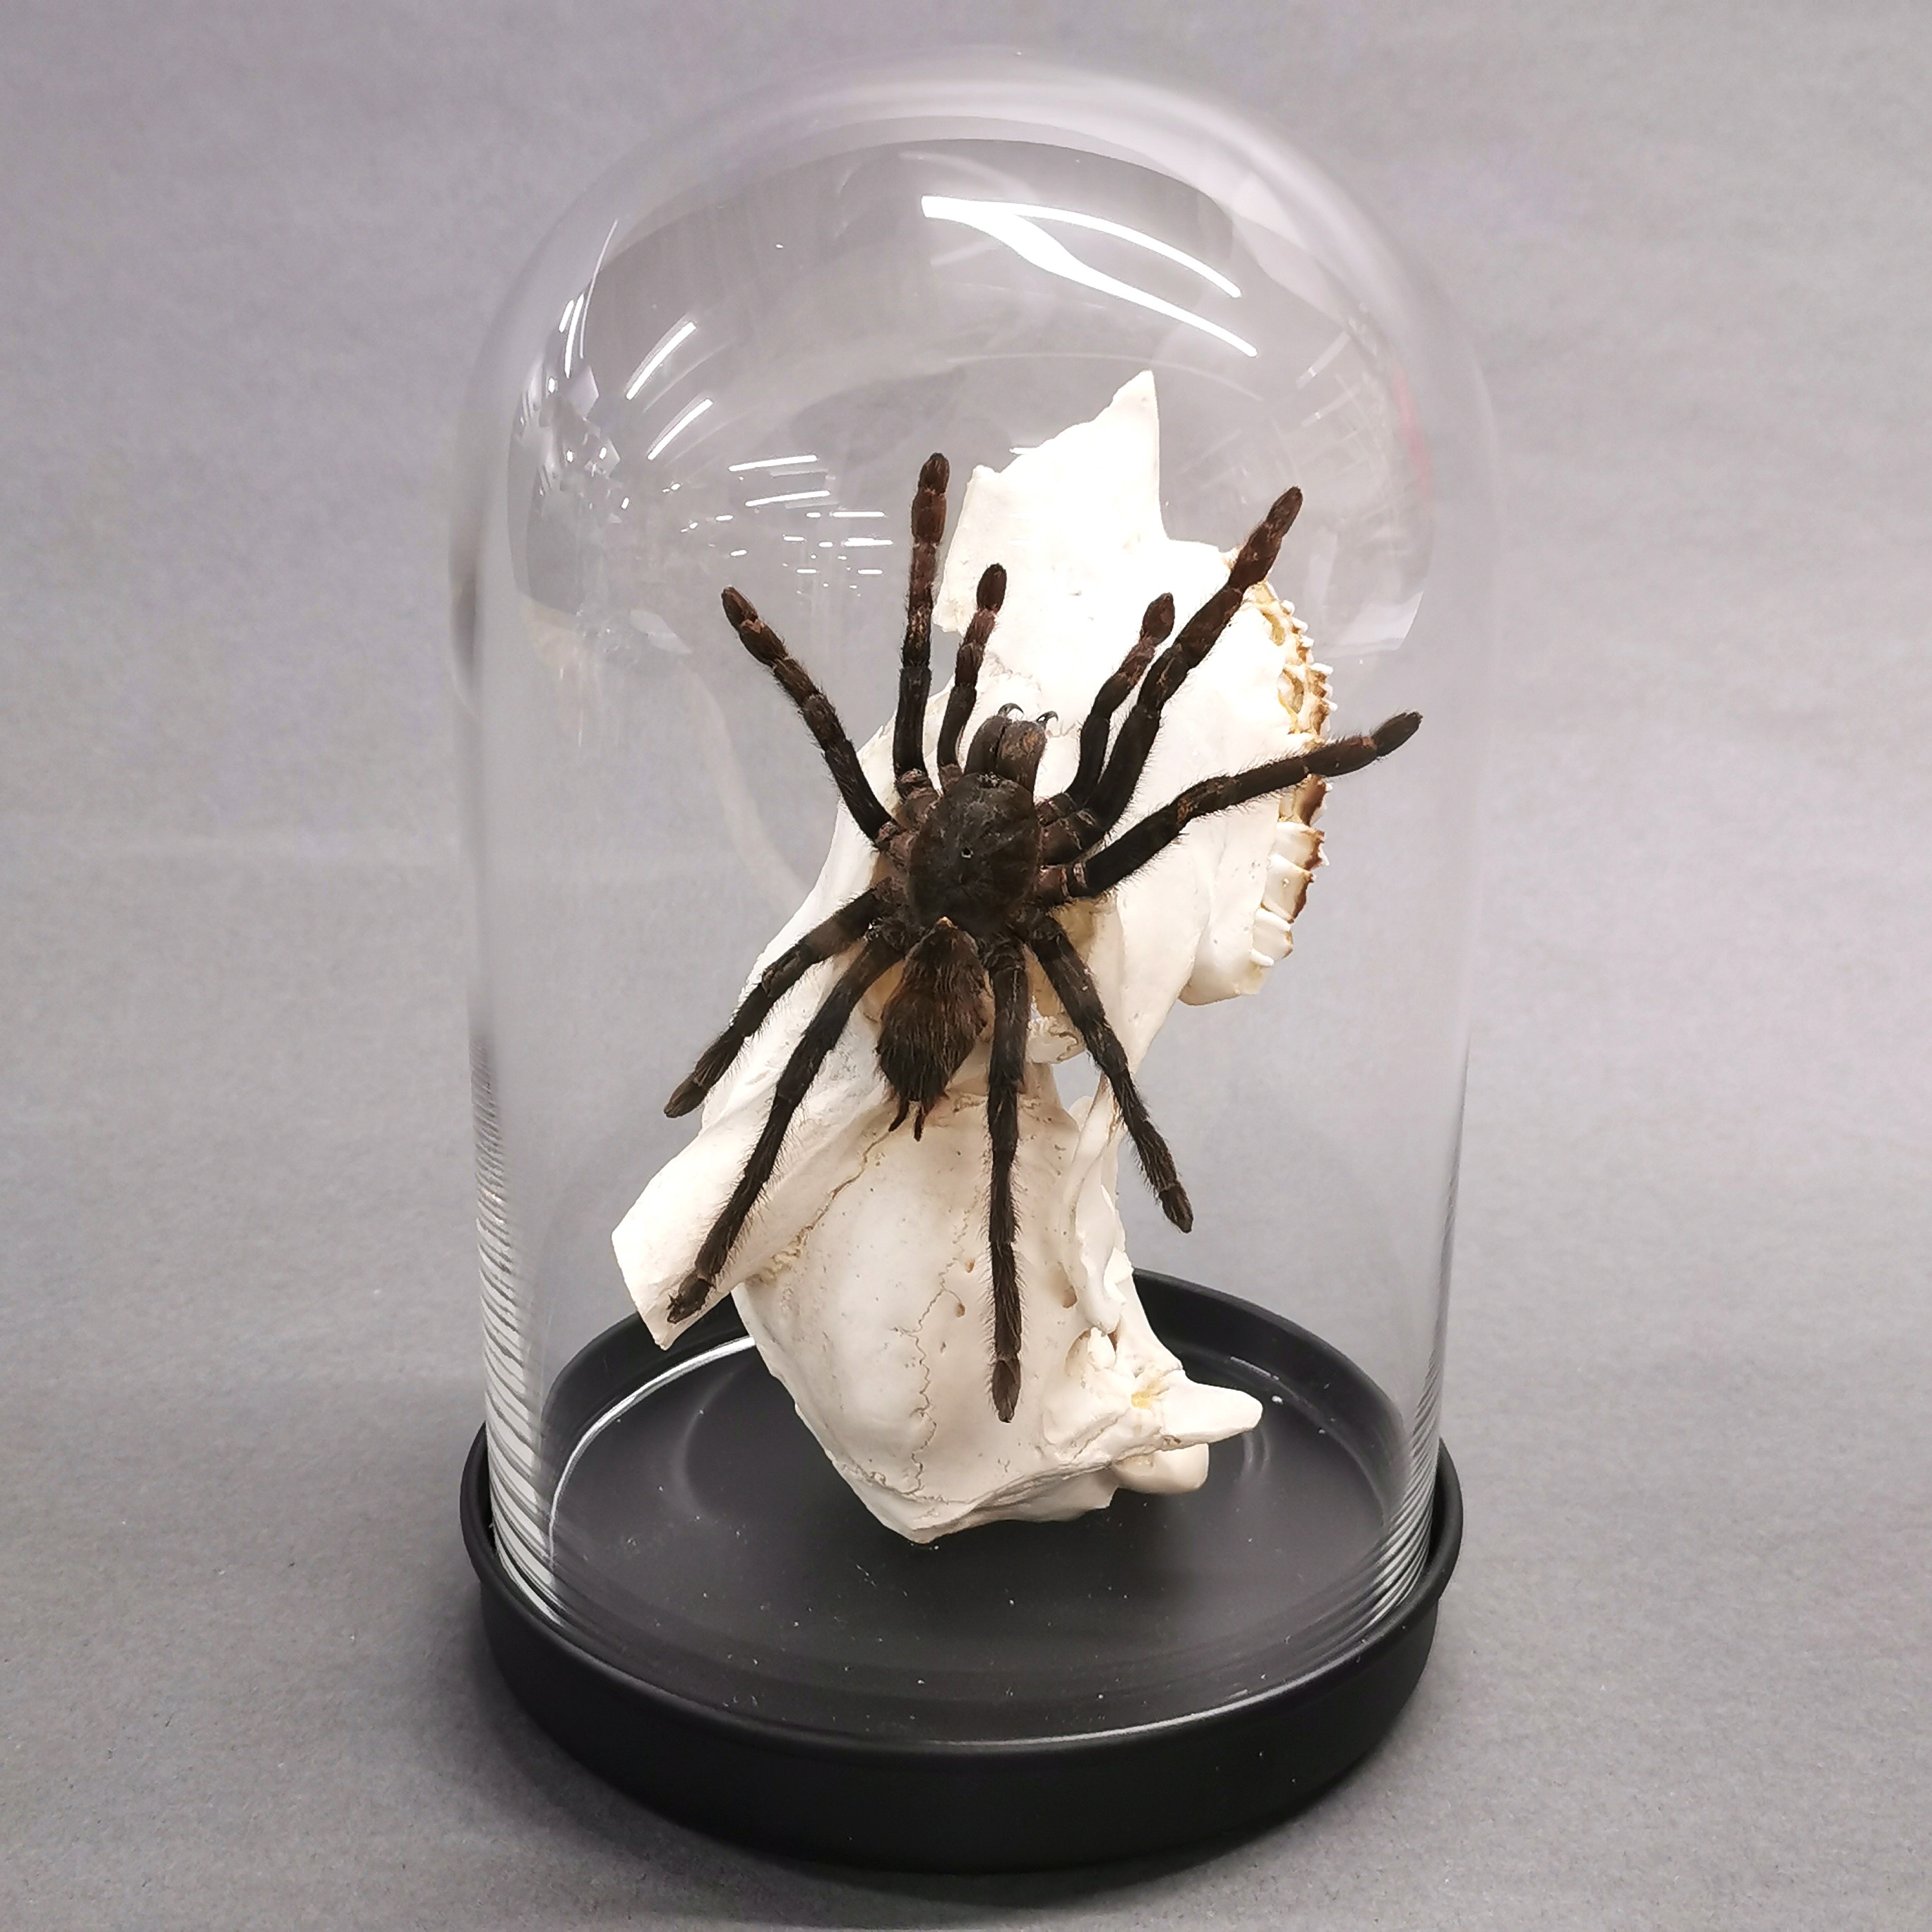 Taxidermy interest: Giant Black Tarantula in glass dome, from Peru, climbing on a section of deer